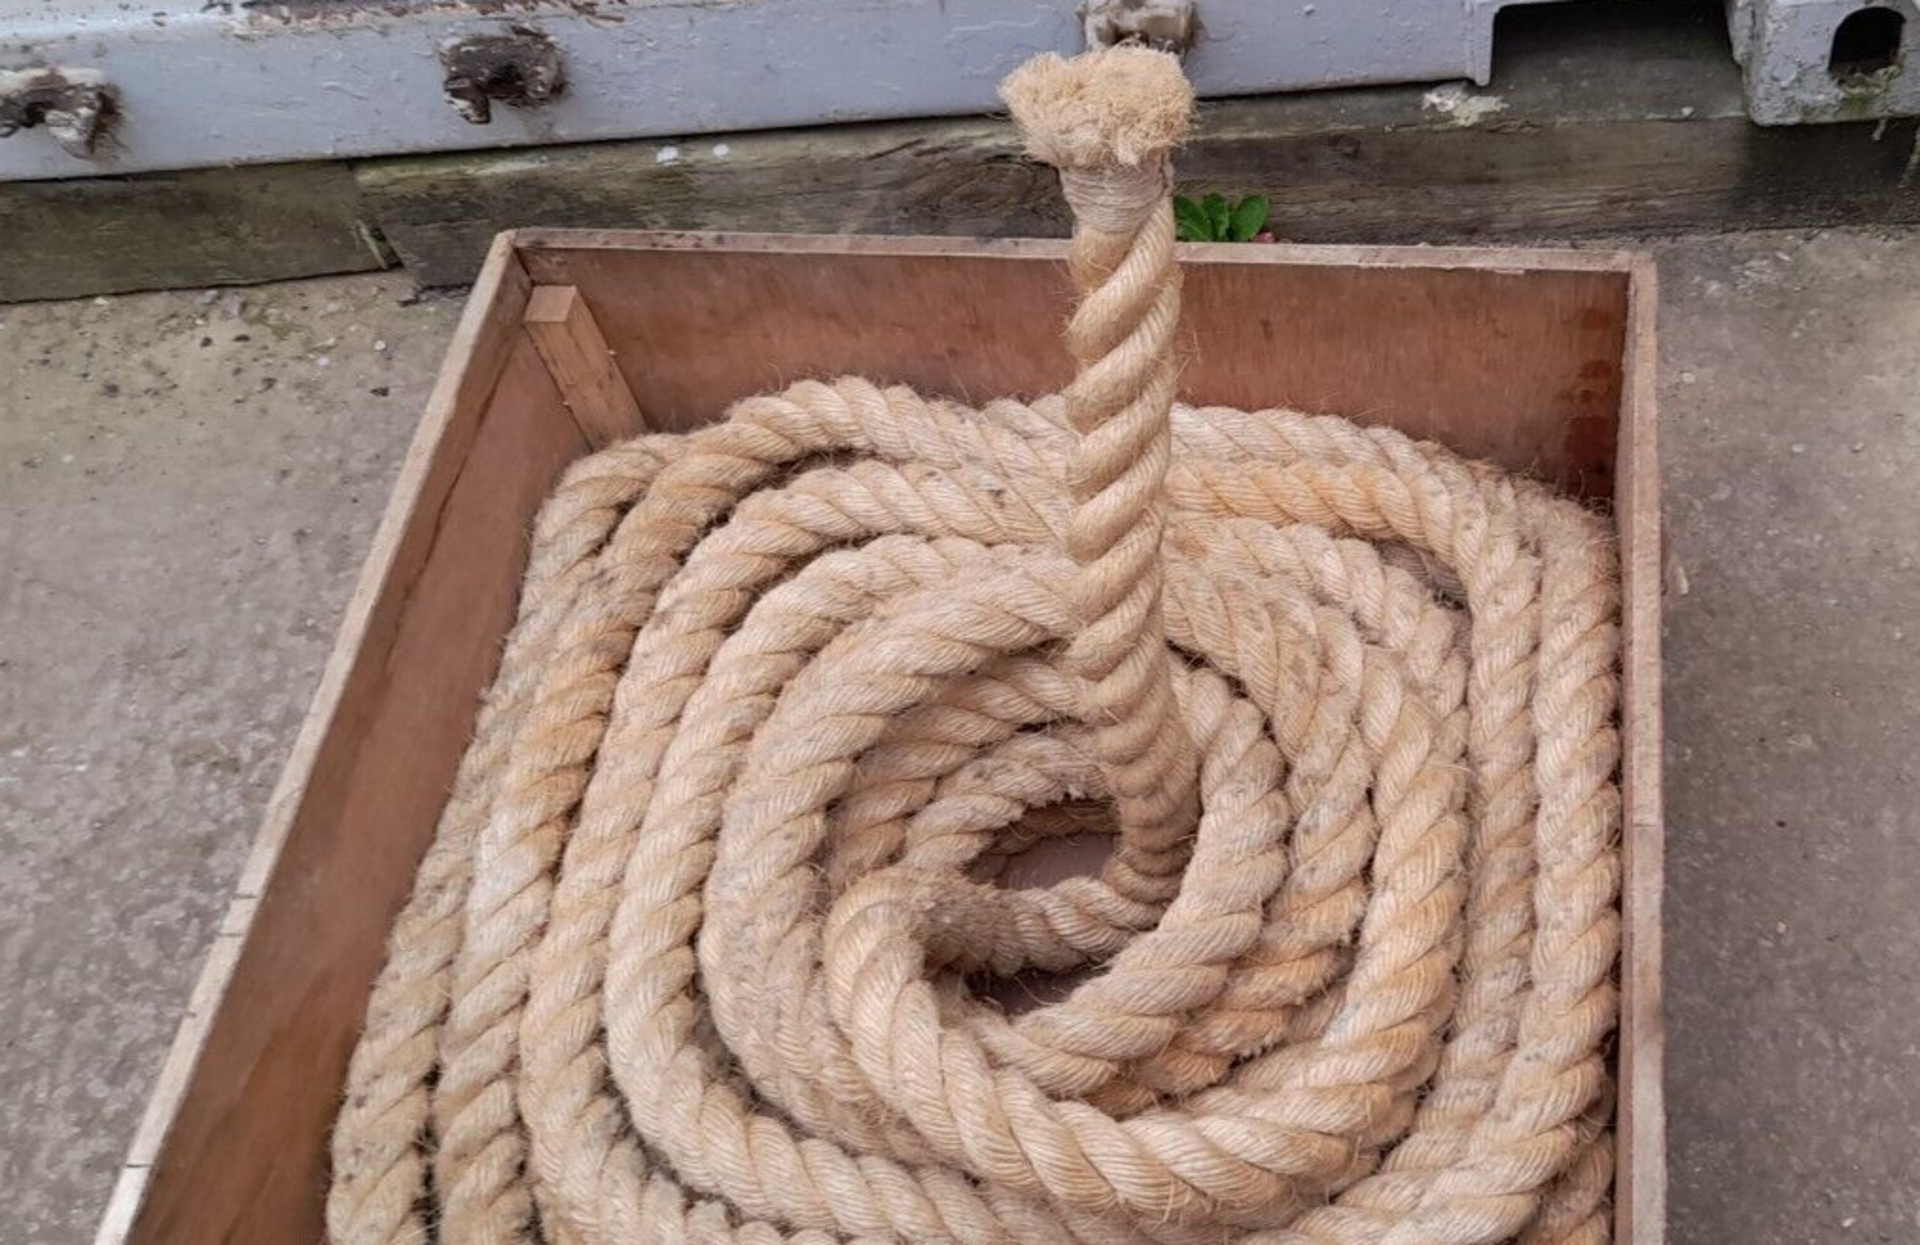 sport TUG O WAR ROPE, USED ONCE, DRY STORED, ABOUT 29 METERS L X 13cm circumference sport gym - Bild 4 aus 5